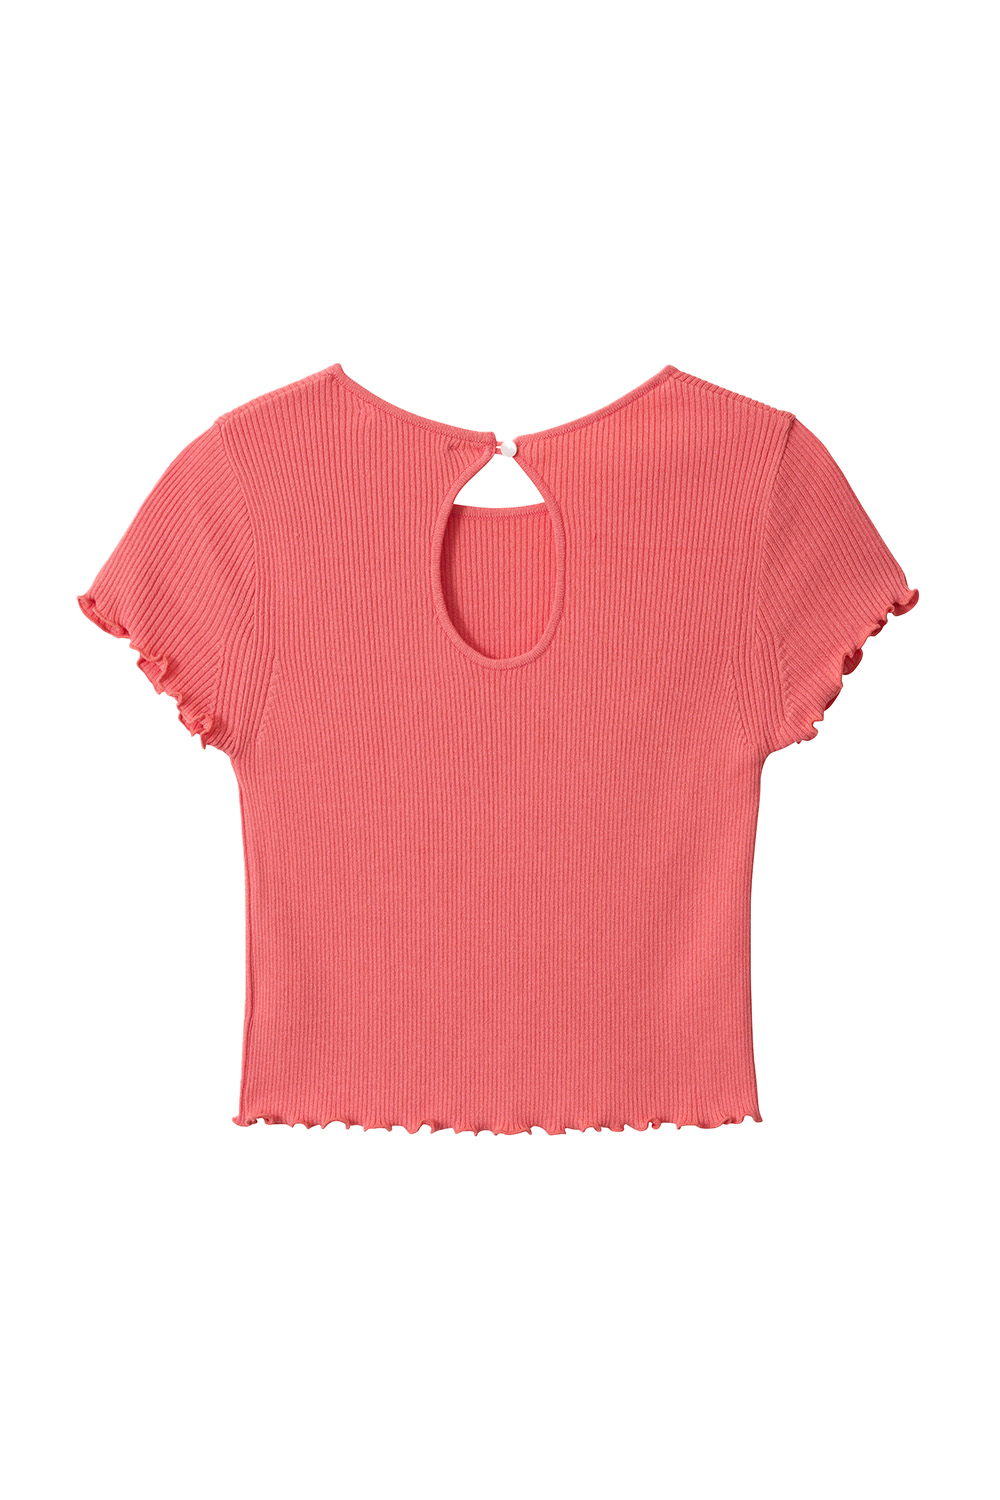 Wave Frill Crop Knit Top (Coral)